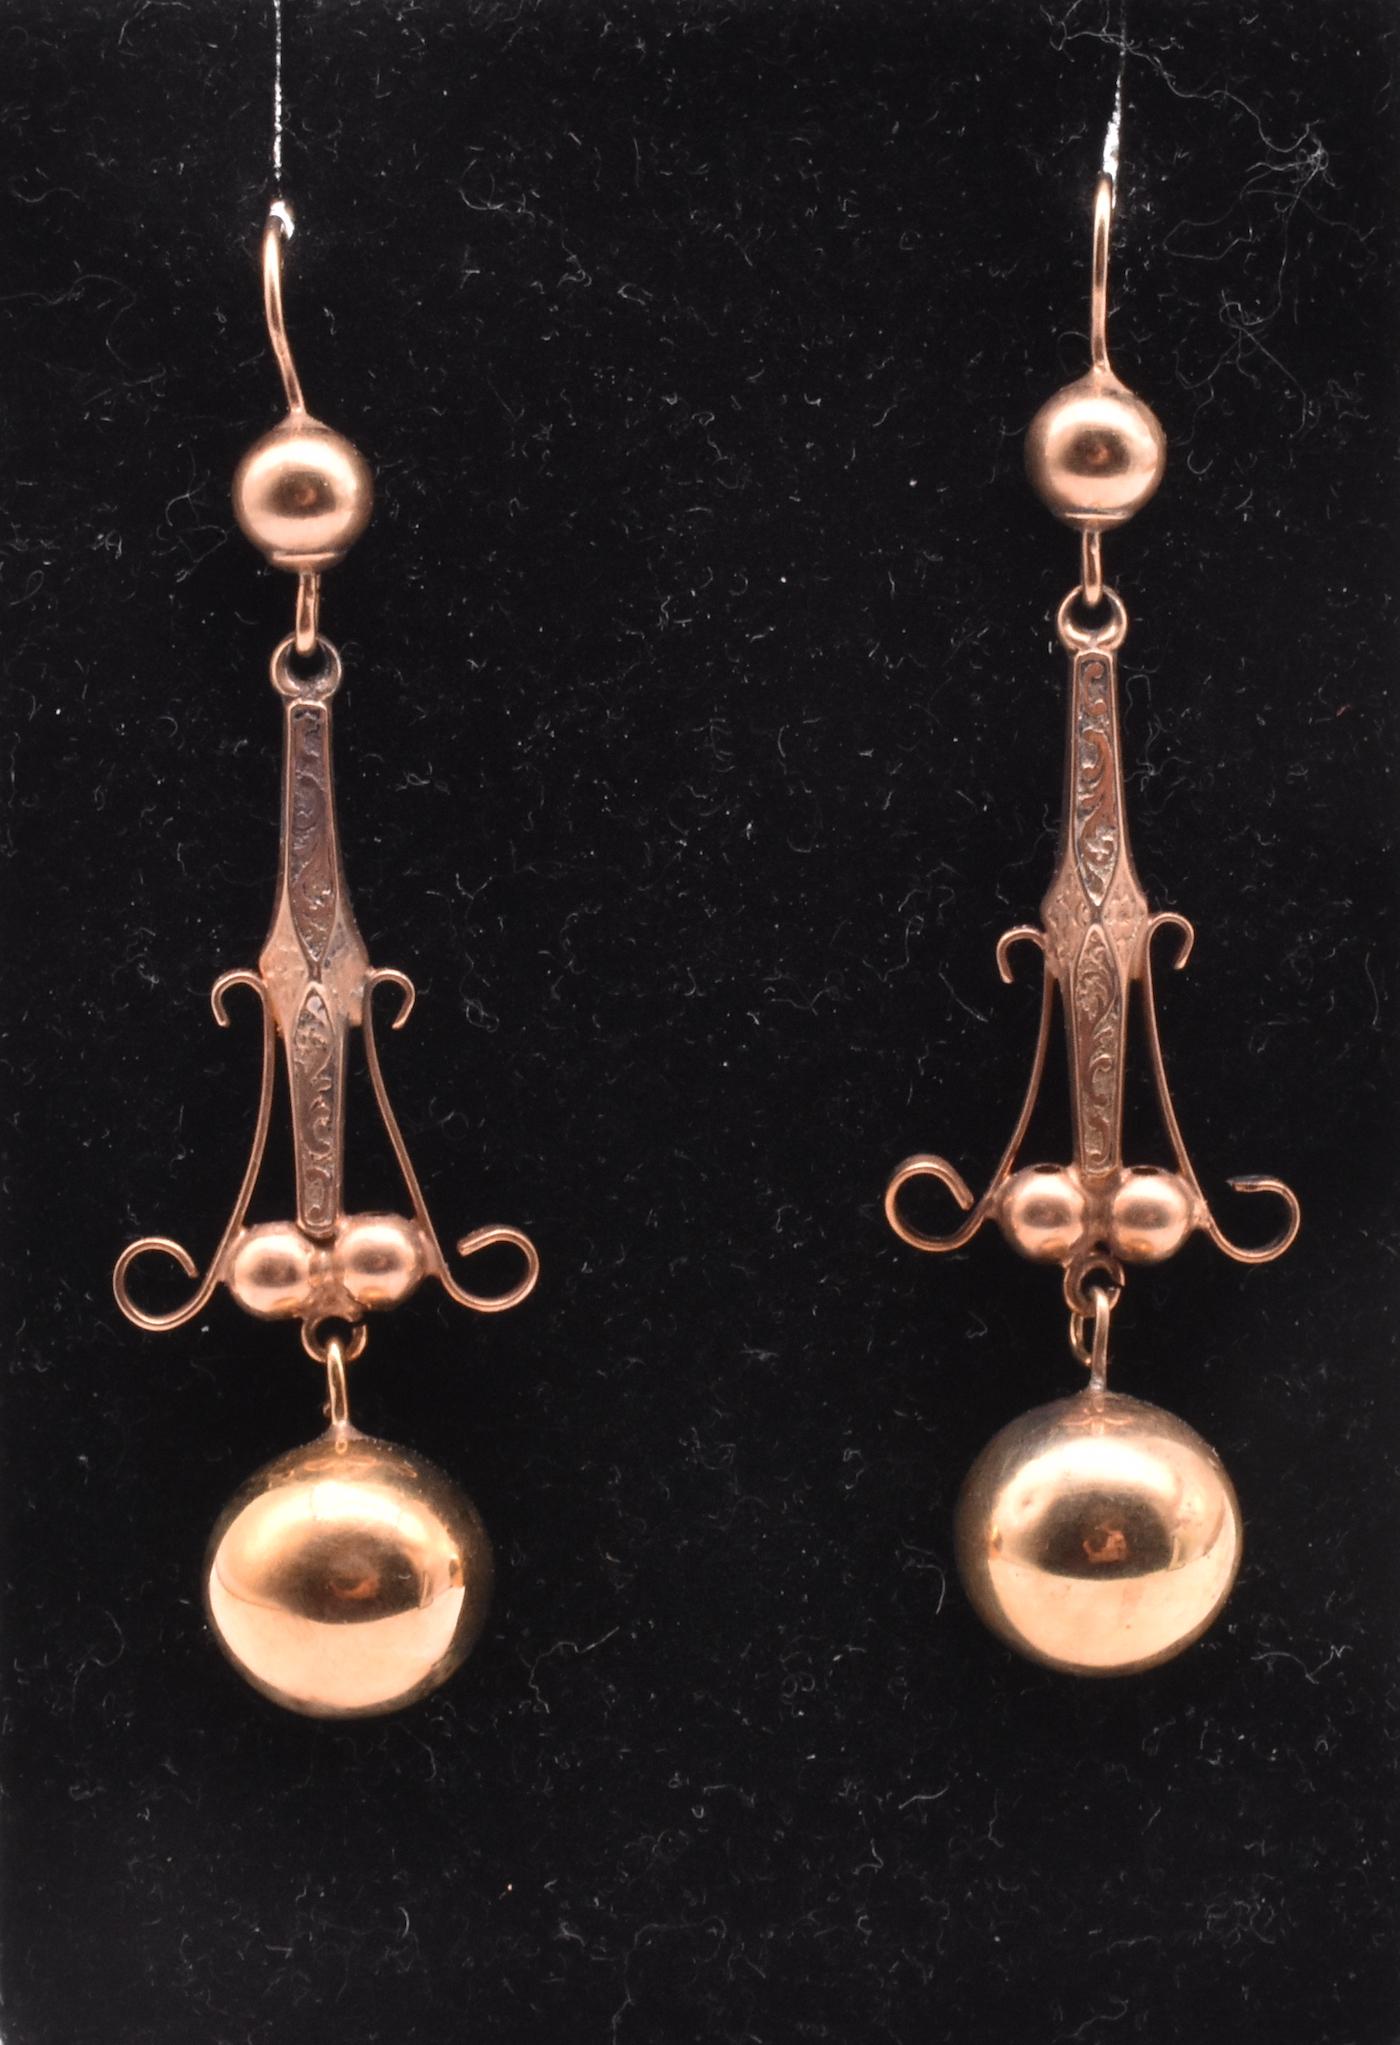 Elegant 9K Victorian rose gold colored earrings with a gold ball dangling from the central part of the earring. The ball is repeated in the tops of the earrings, middle, and the very bottom. The original shepherds hook attachment allows for the